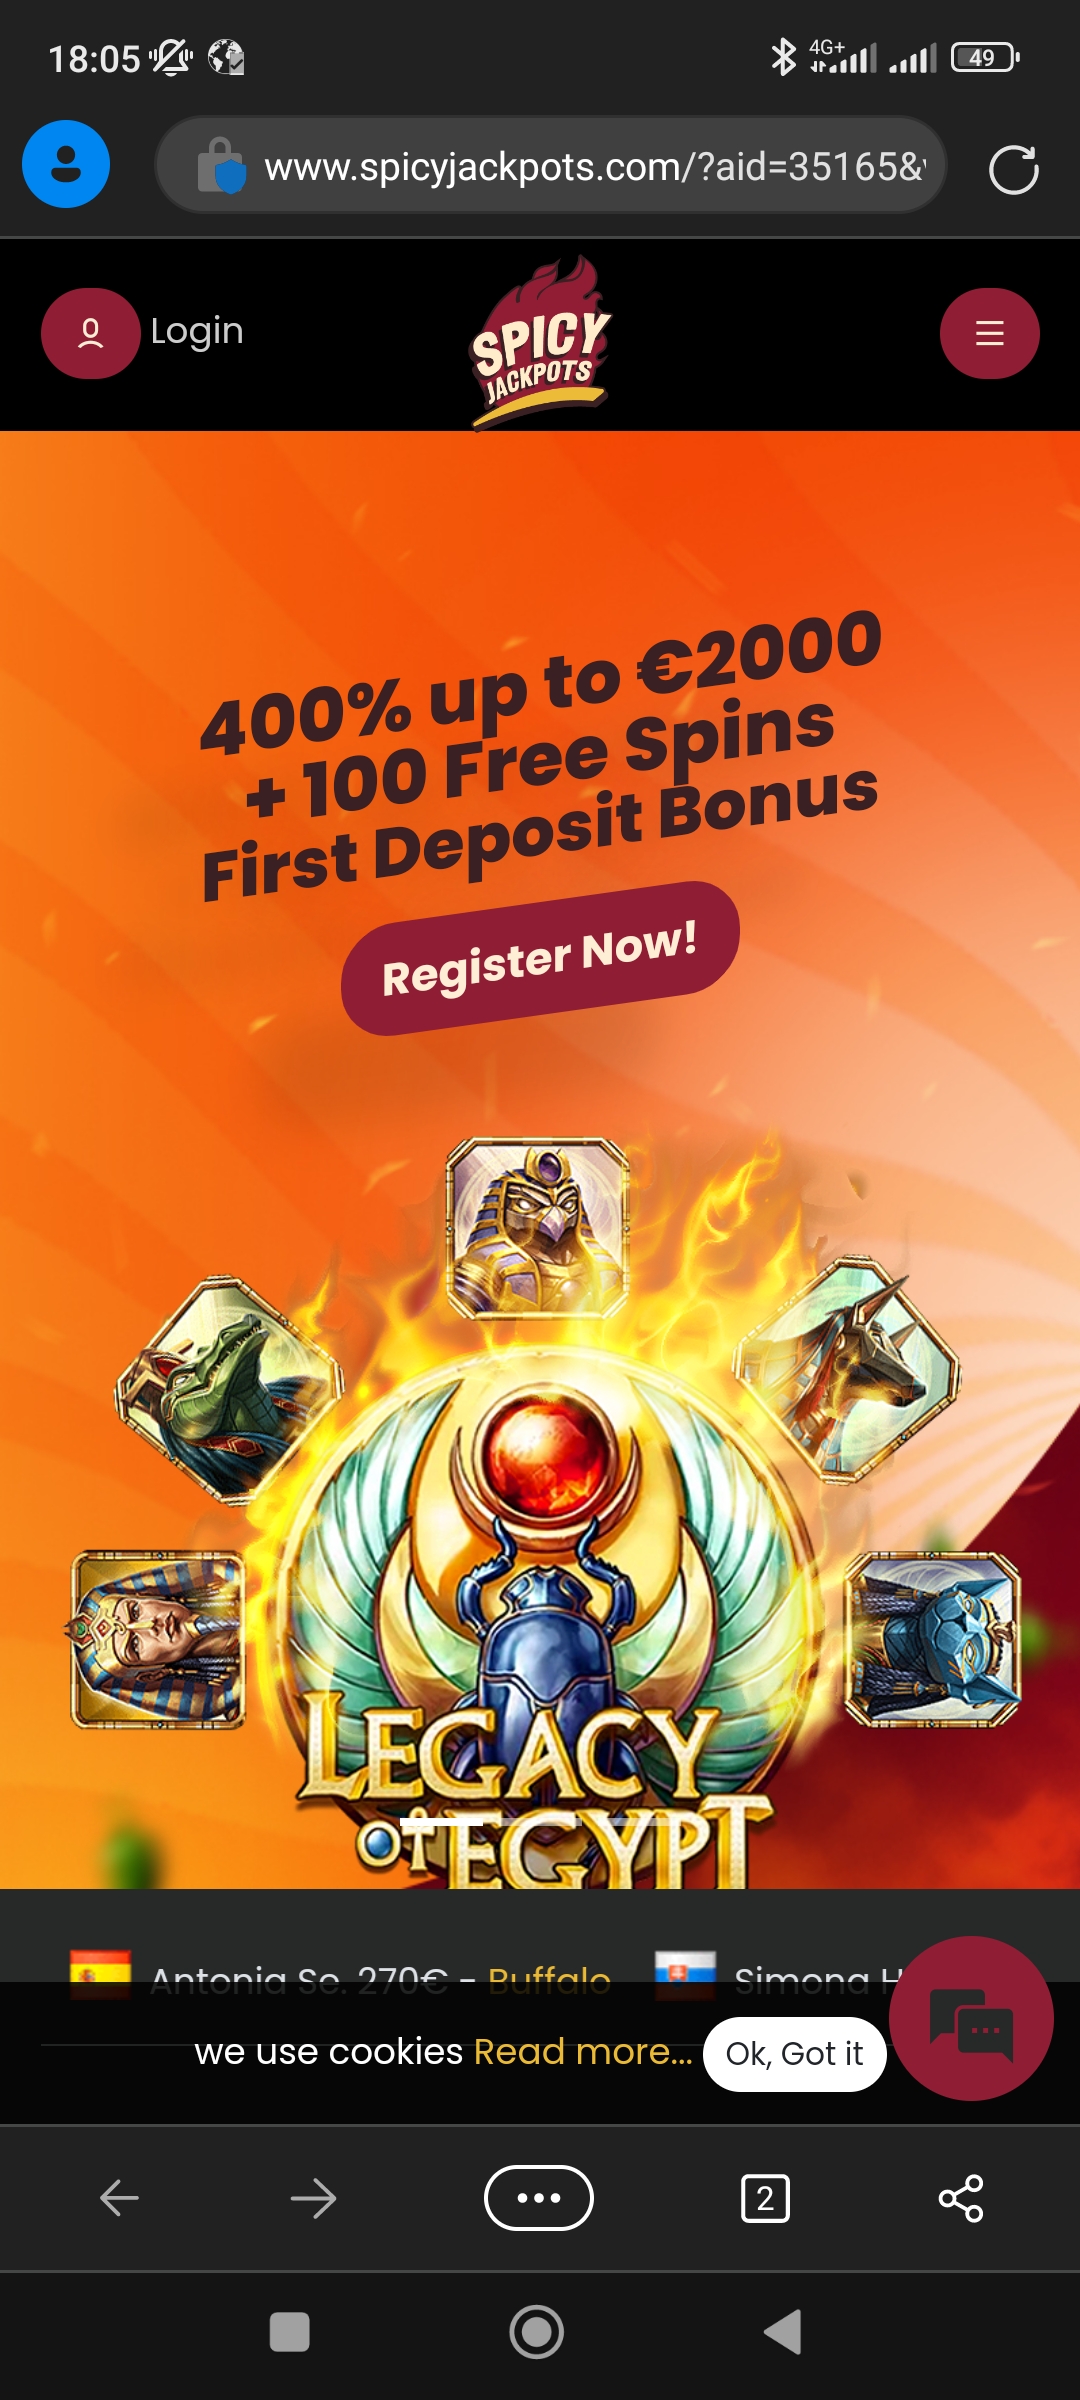 Need More Time? Read These Tips To Eliminate Raptor Wins Casino review